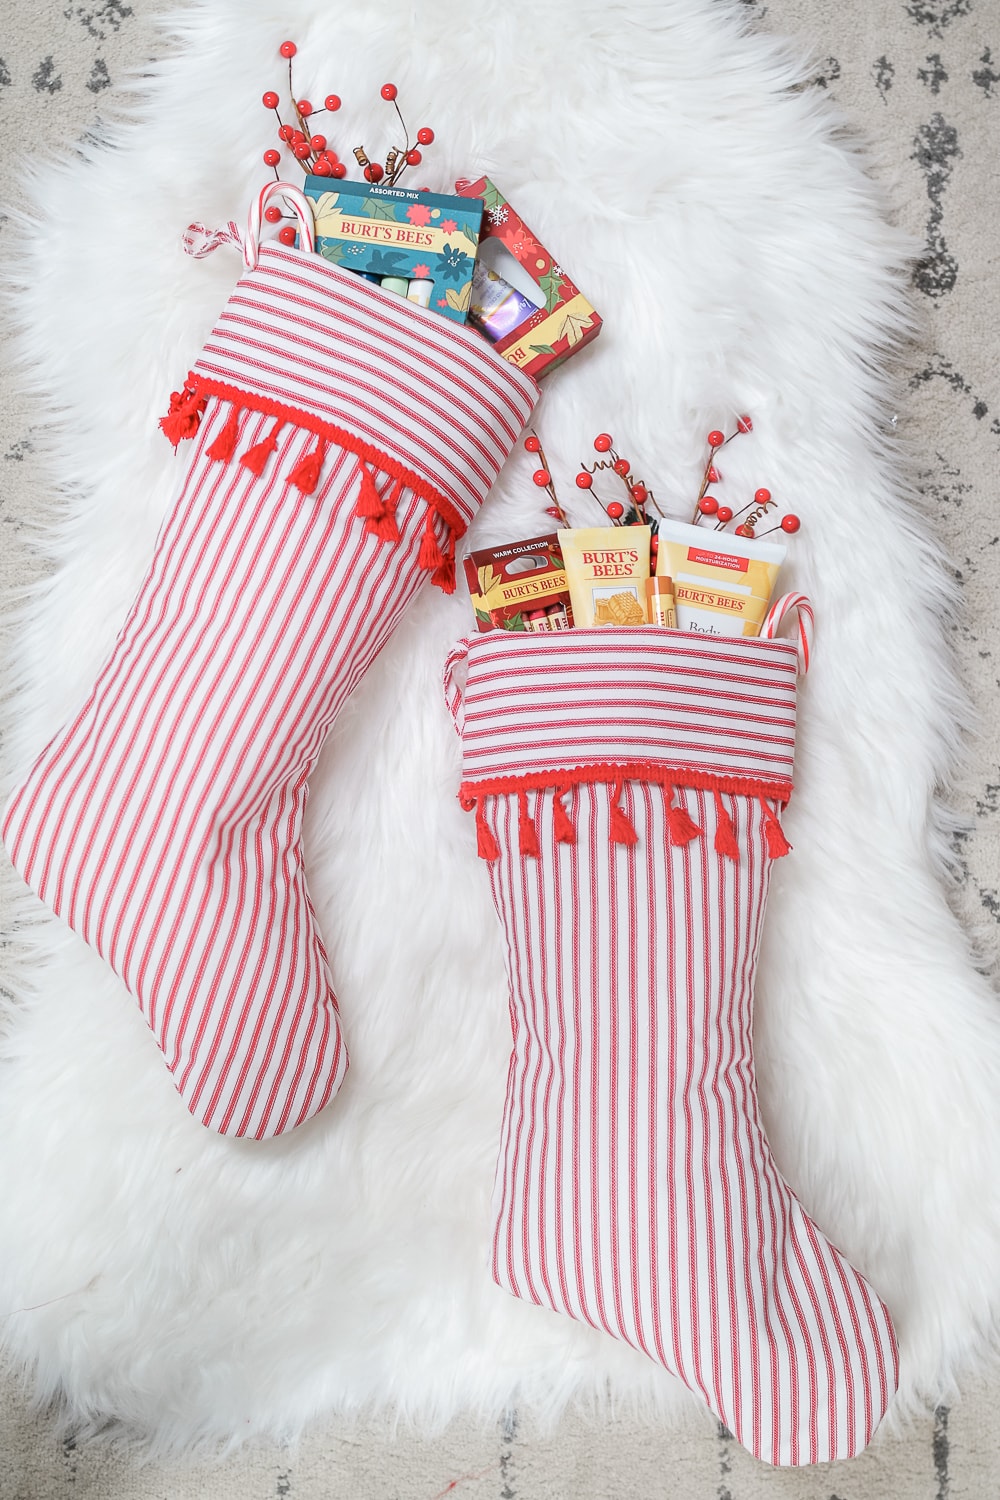 Blogger Stephanie Ziajka rounds up the best Burt's Bees stocking stuffers for girls and guys on Diary of a Debutante